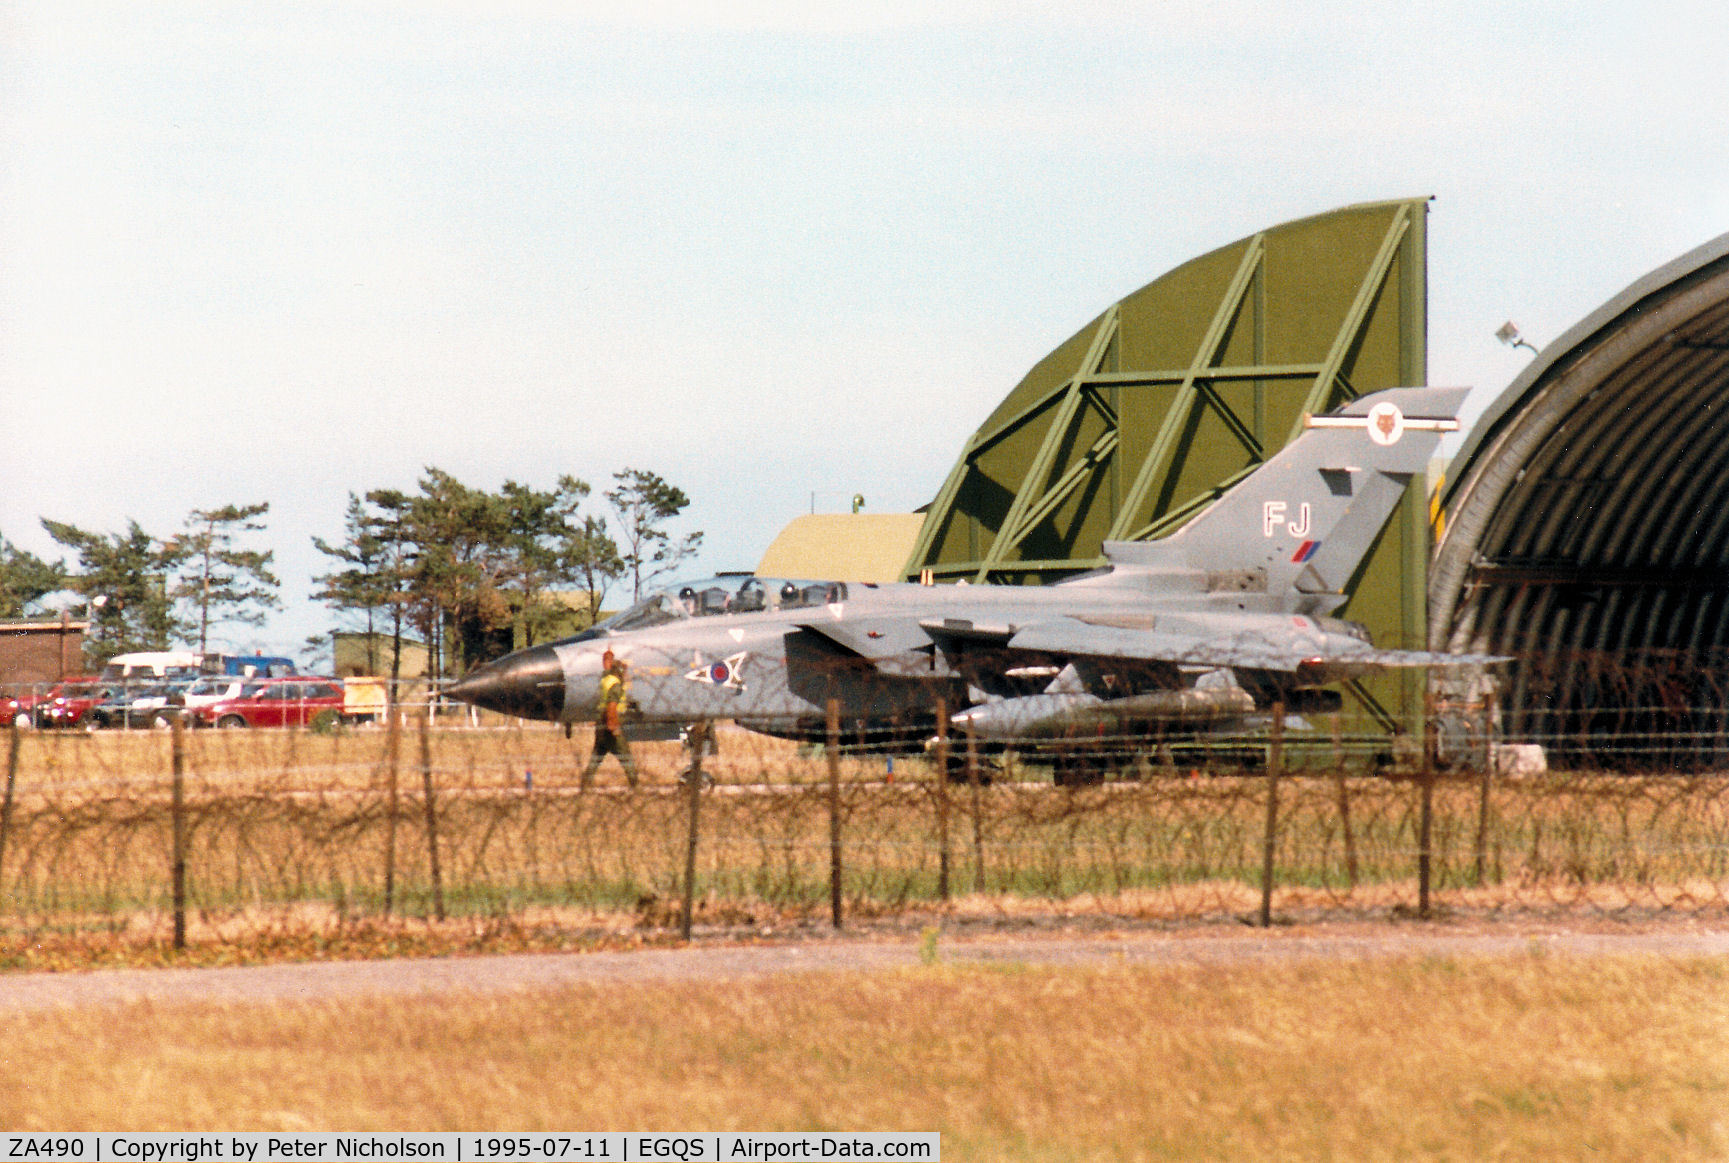 ZA490, 1983 Panavia Tornado GR.1B C/N 305/BS106/3142, Tornado GR.1B of 12 Squadron preparing to depart for a mission at RAF Lossiemouth in the Summer of 1995.